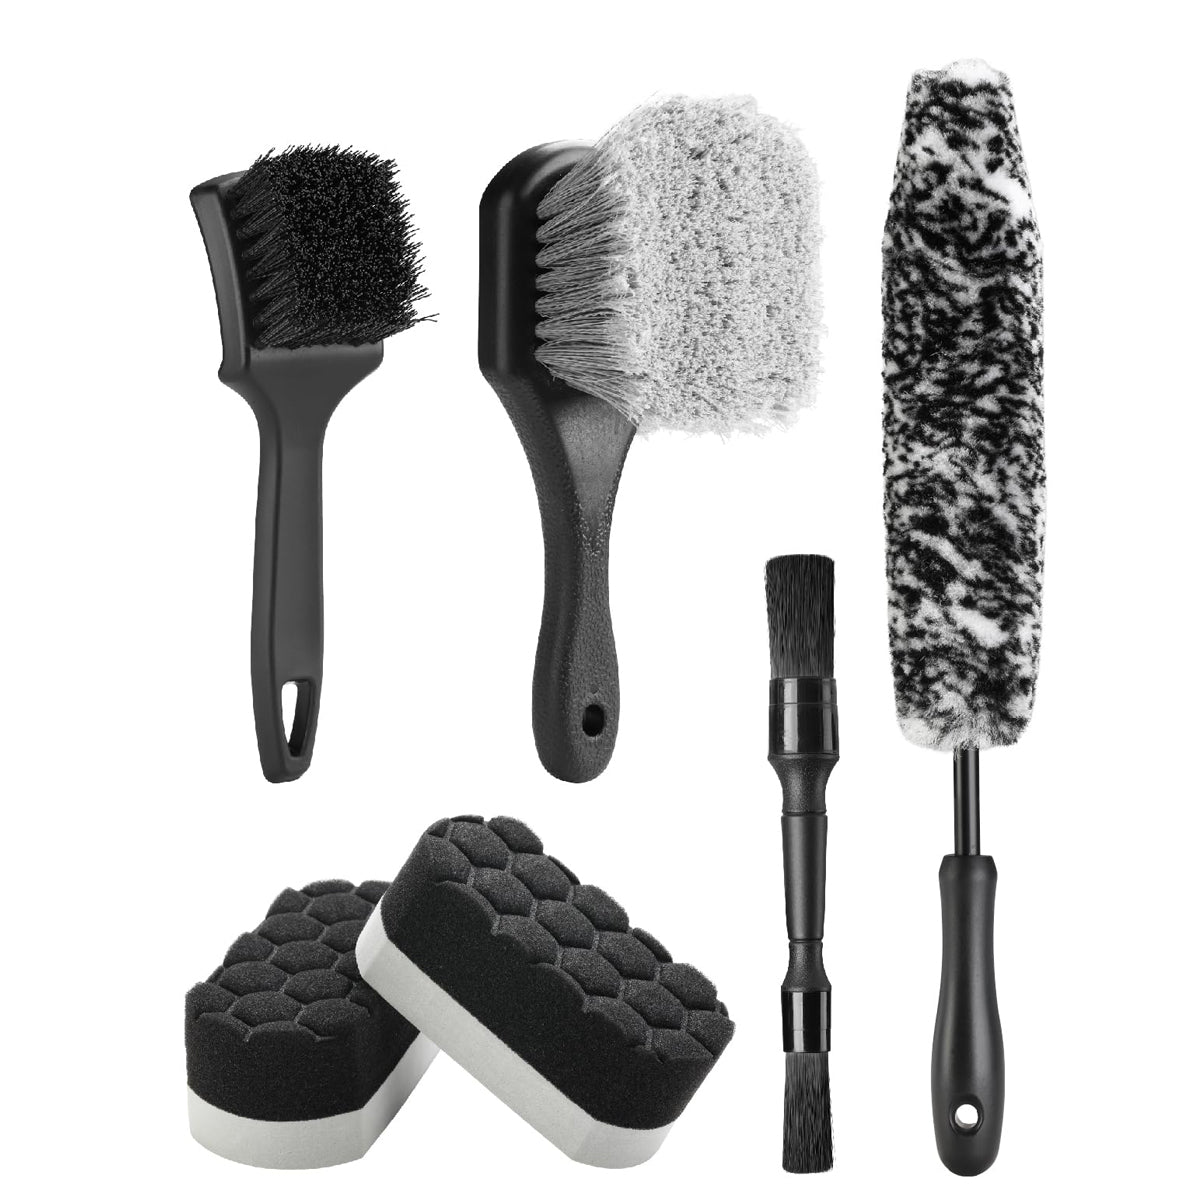 6PCS Car Wheel Cleaning Pro Kit, Microfiber Bendable Brush, Double-Ended Detailing Brush, and Detailing Pads, Scratch-Free & Multipurpose